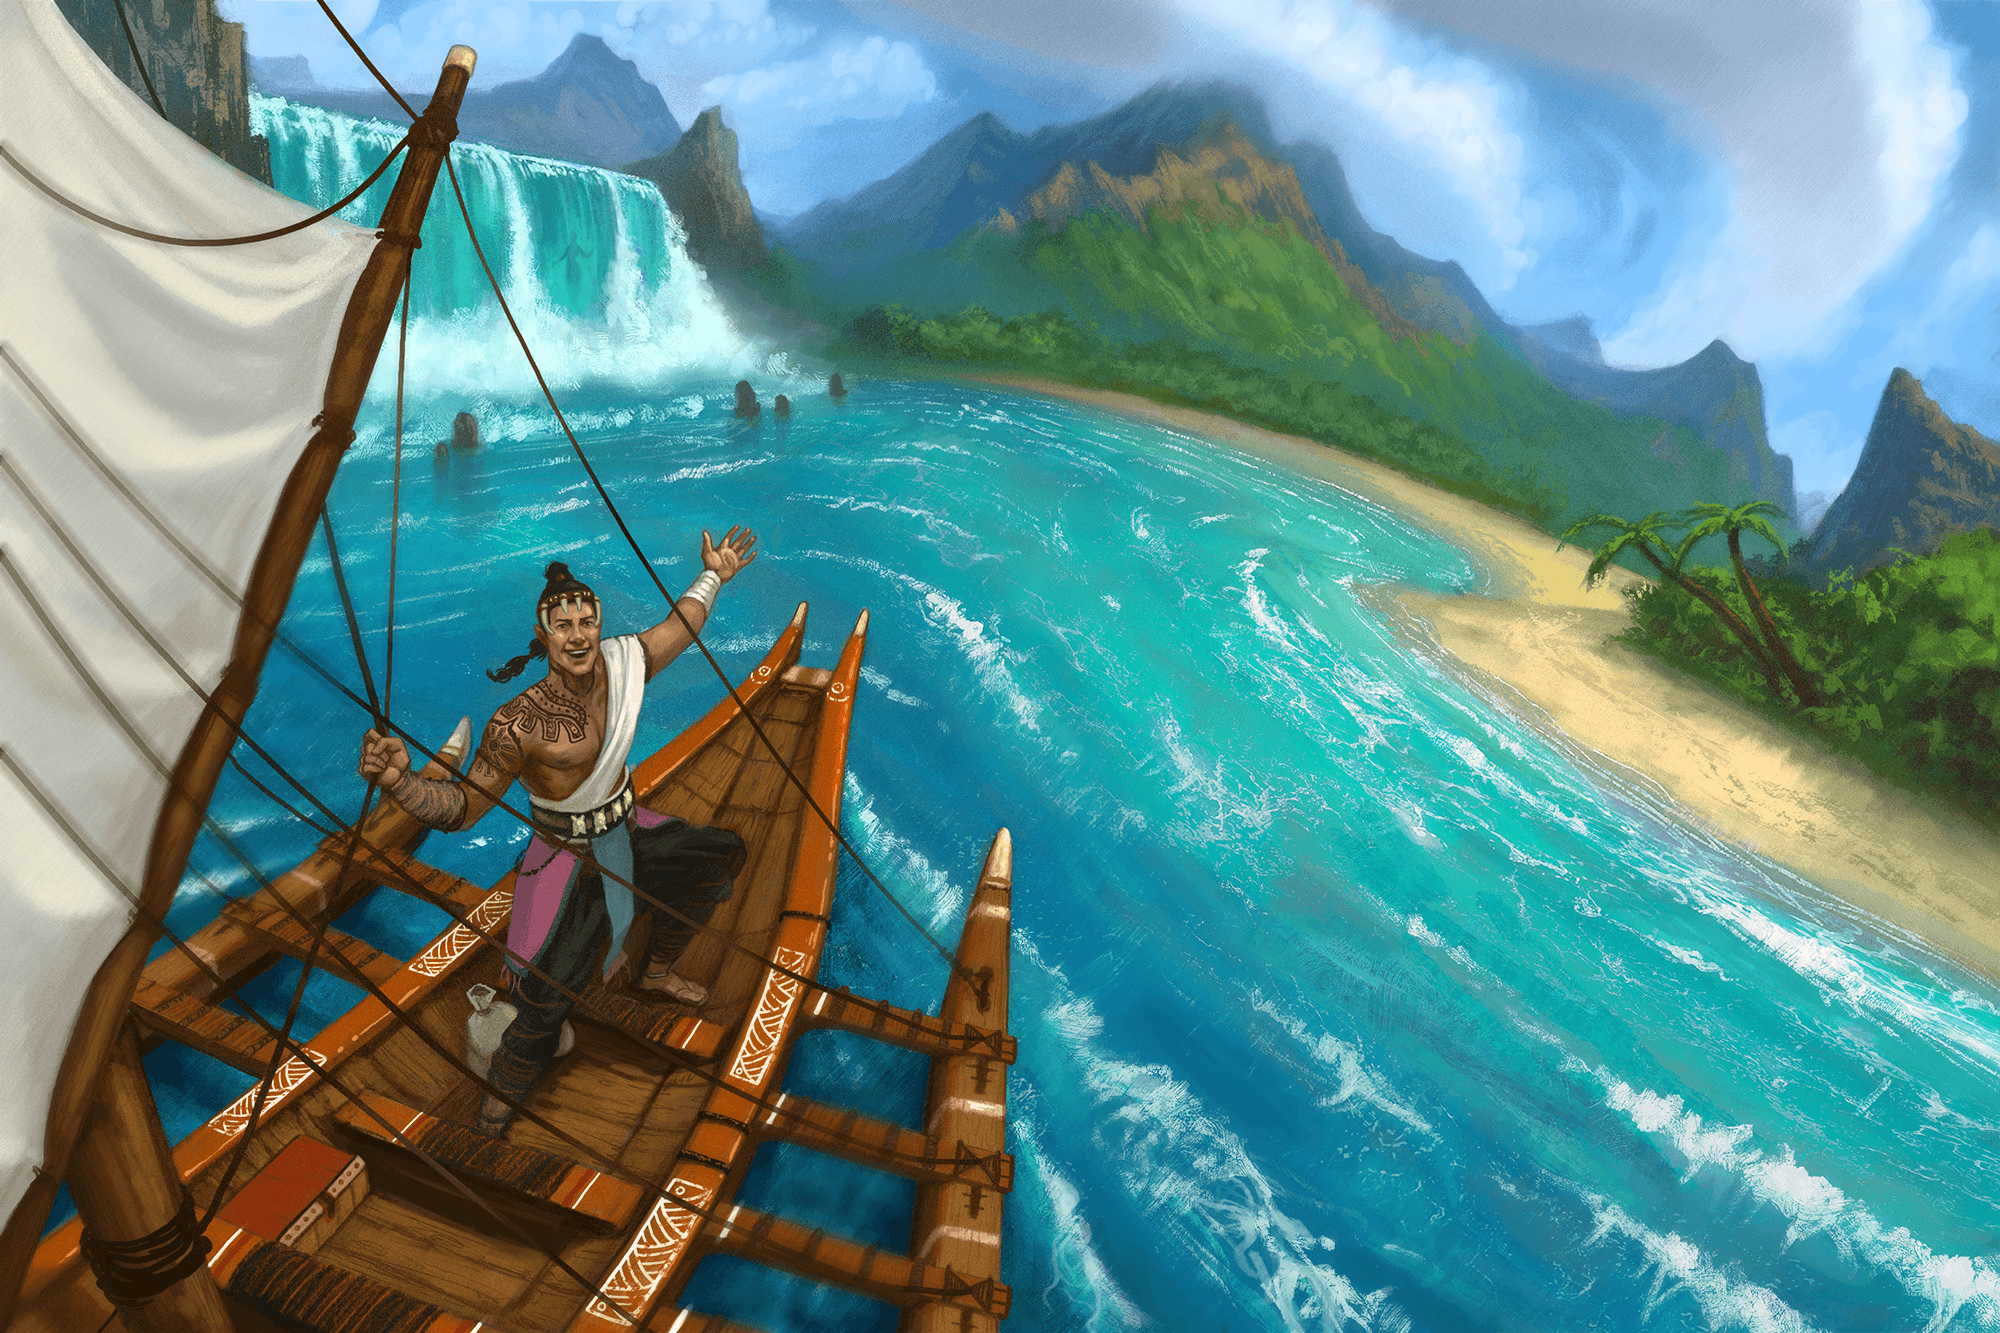 On a bright, sunny day a Polynesian-inspired dinghy pulls up to an island with a waterfall on the left and mountains in the distance. Behind the waterfall, there's a subtle sillhouette of a woman. The ocean surrounding the island is a comforting aqua blue. Taiwalei, a human Pathfinder, faces the viewer, excitedly beckoning toward the island, smiling and eager for the adventure ahead